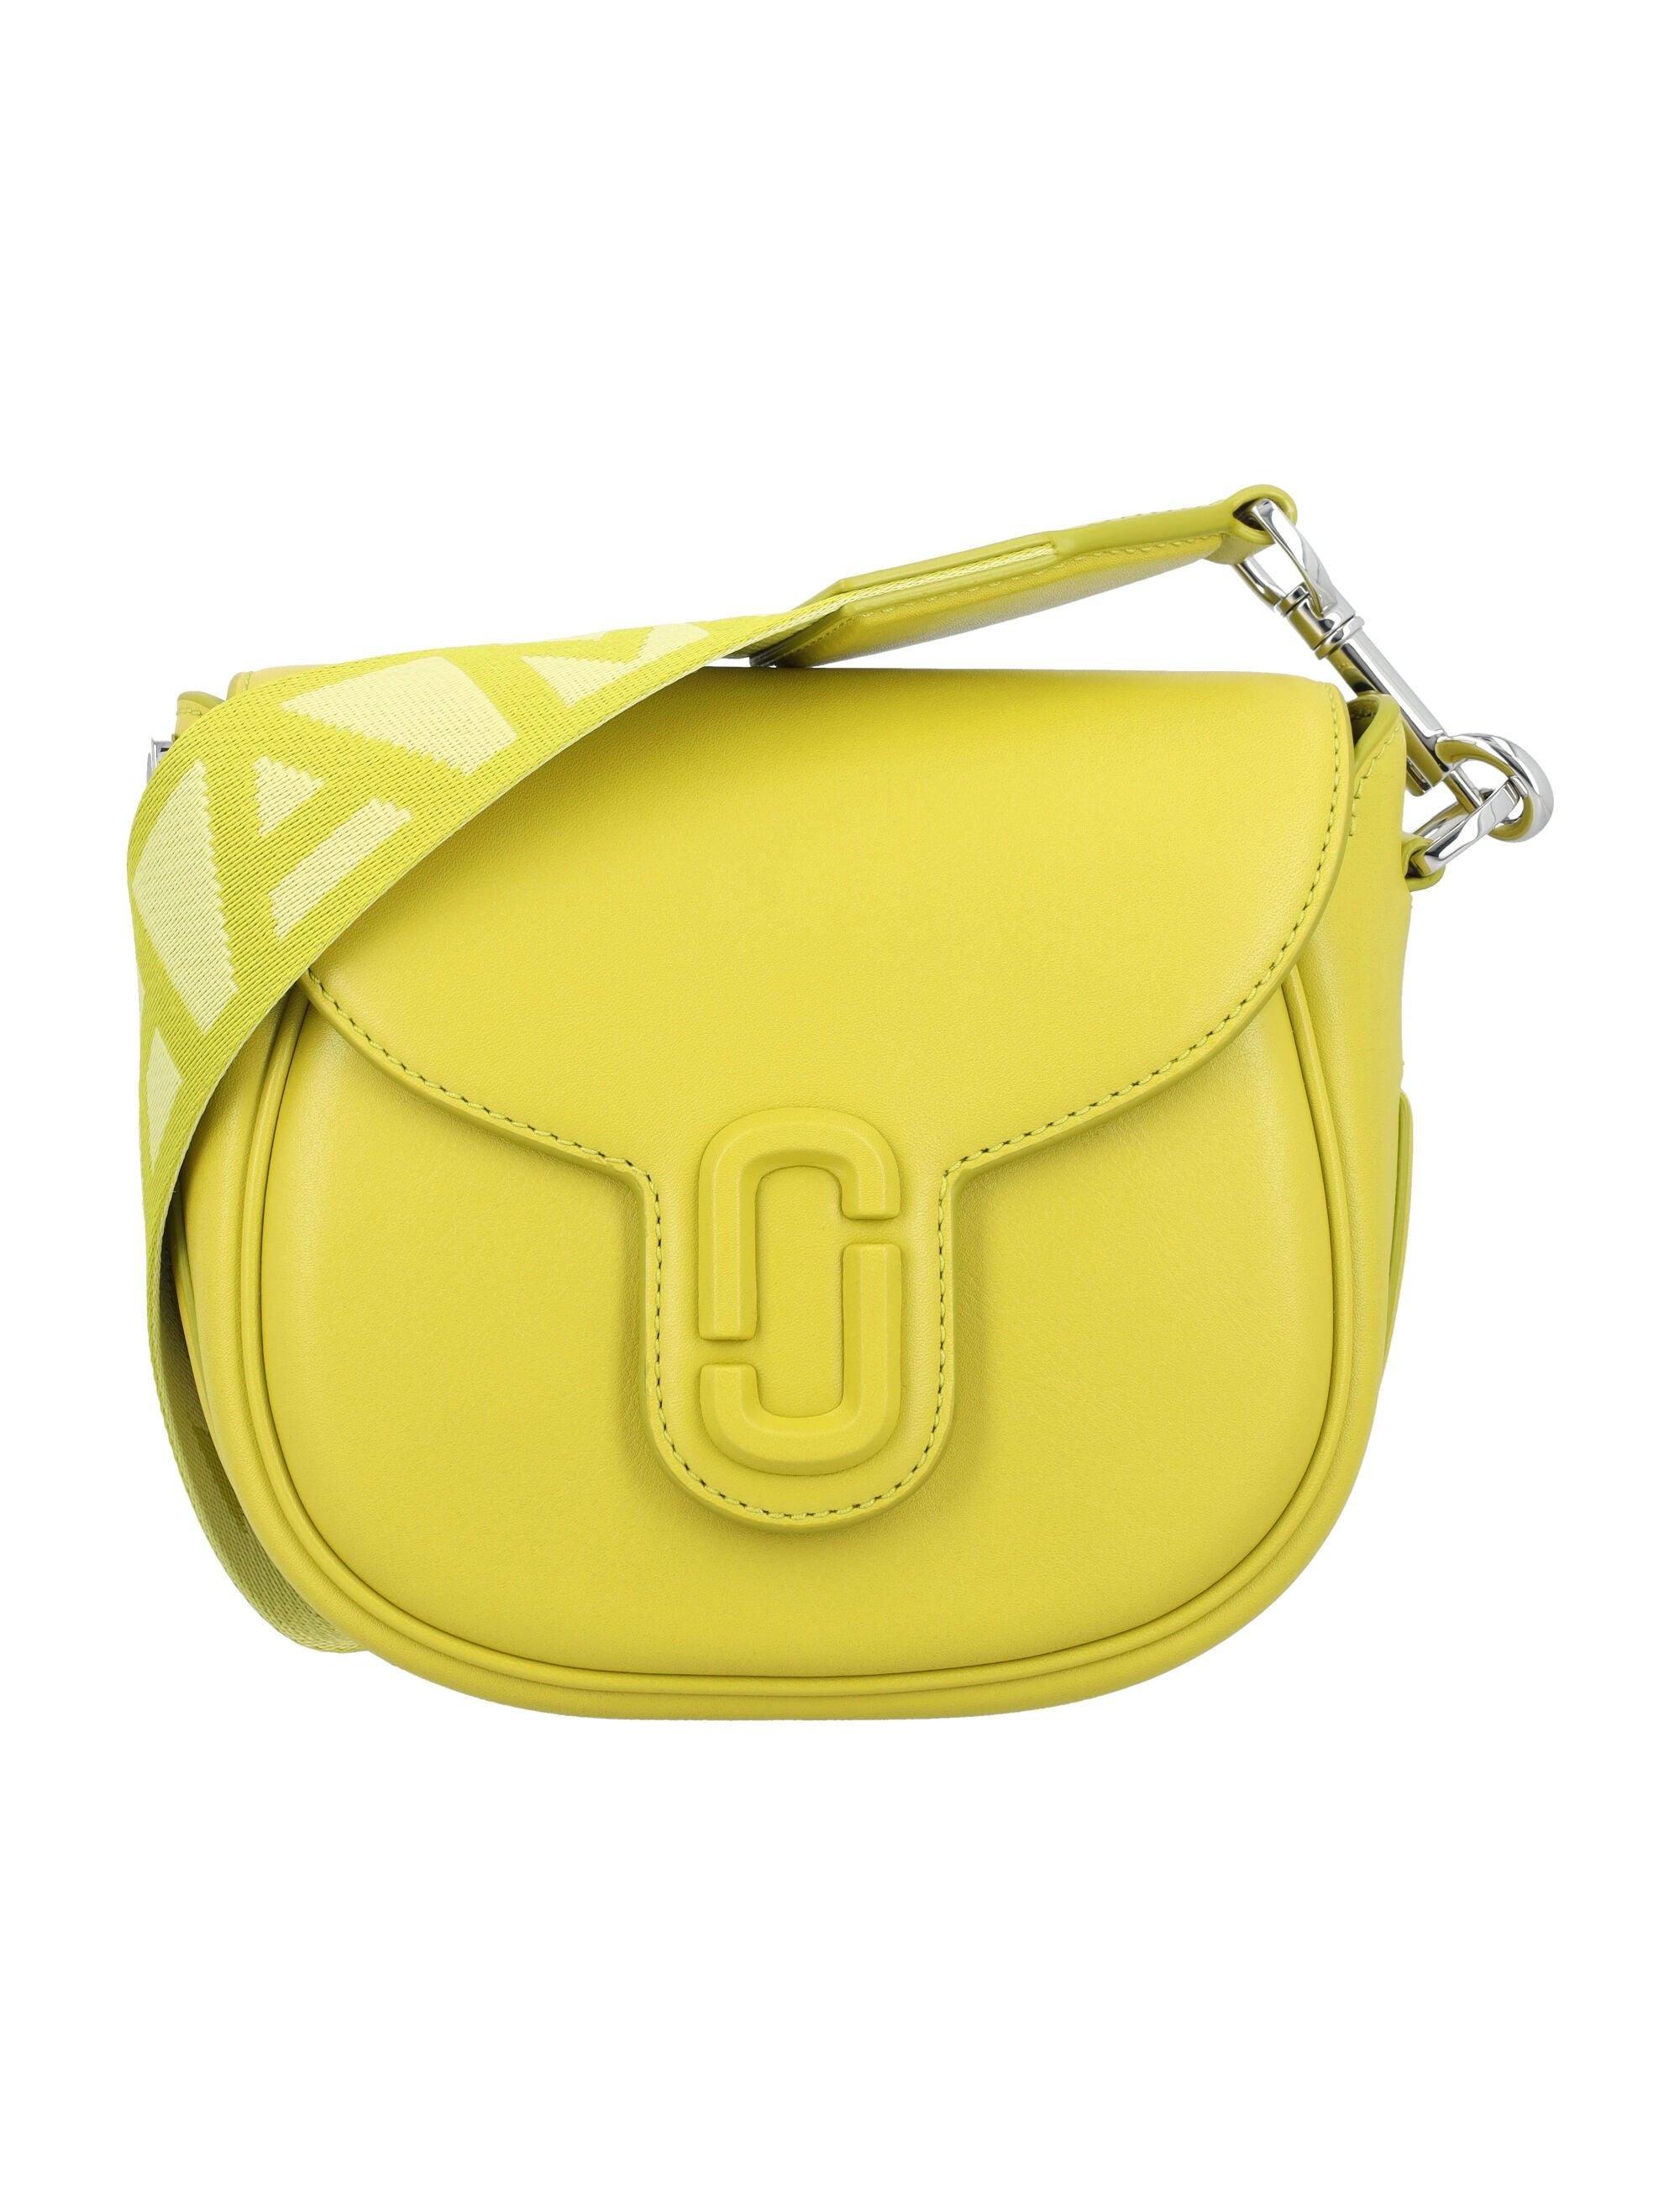 Marc Jacobs The J Marc Small Saddle Bag in Yellow | Lyst